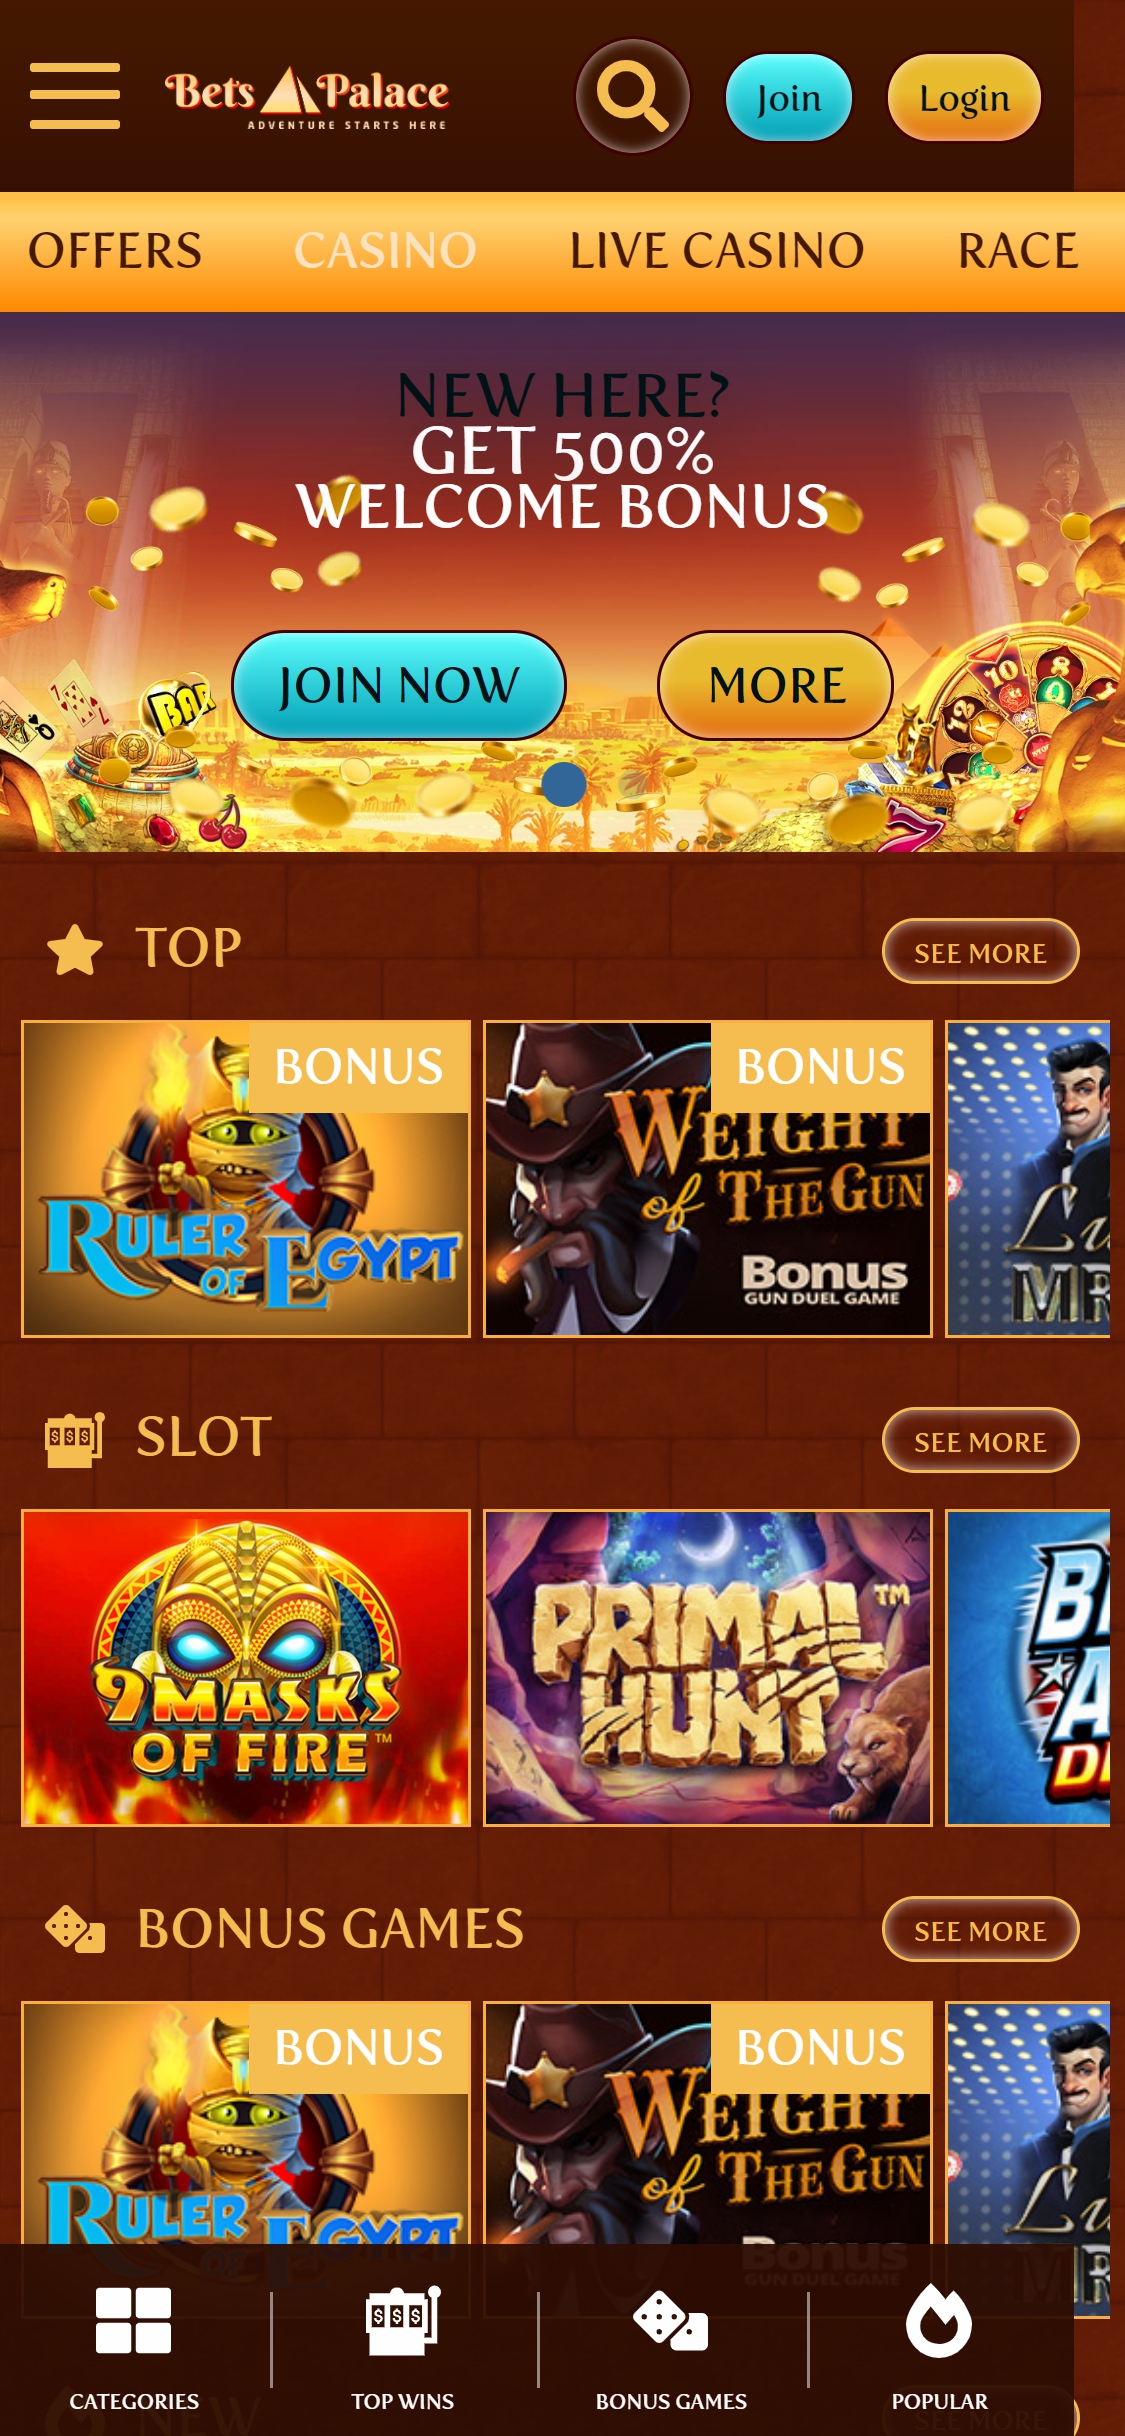 BetsPalace Casino Mobile Games Review